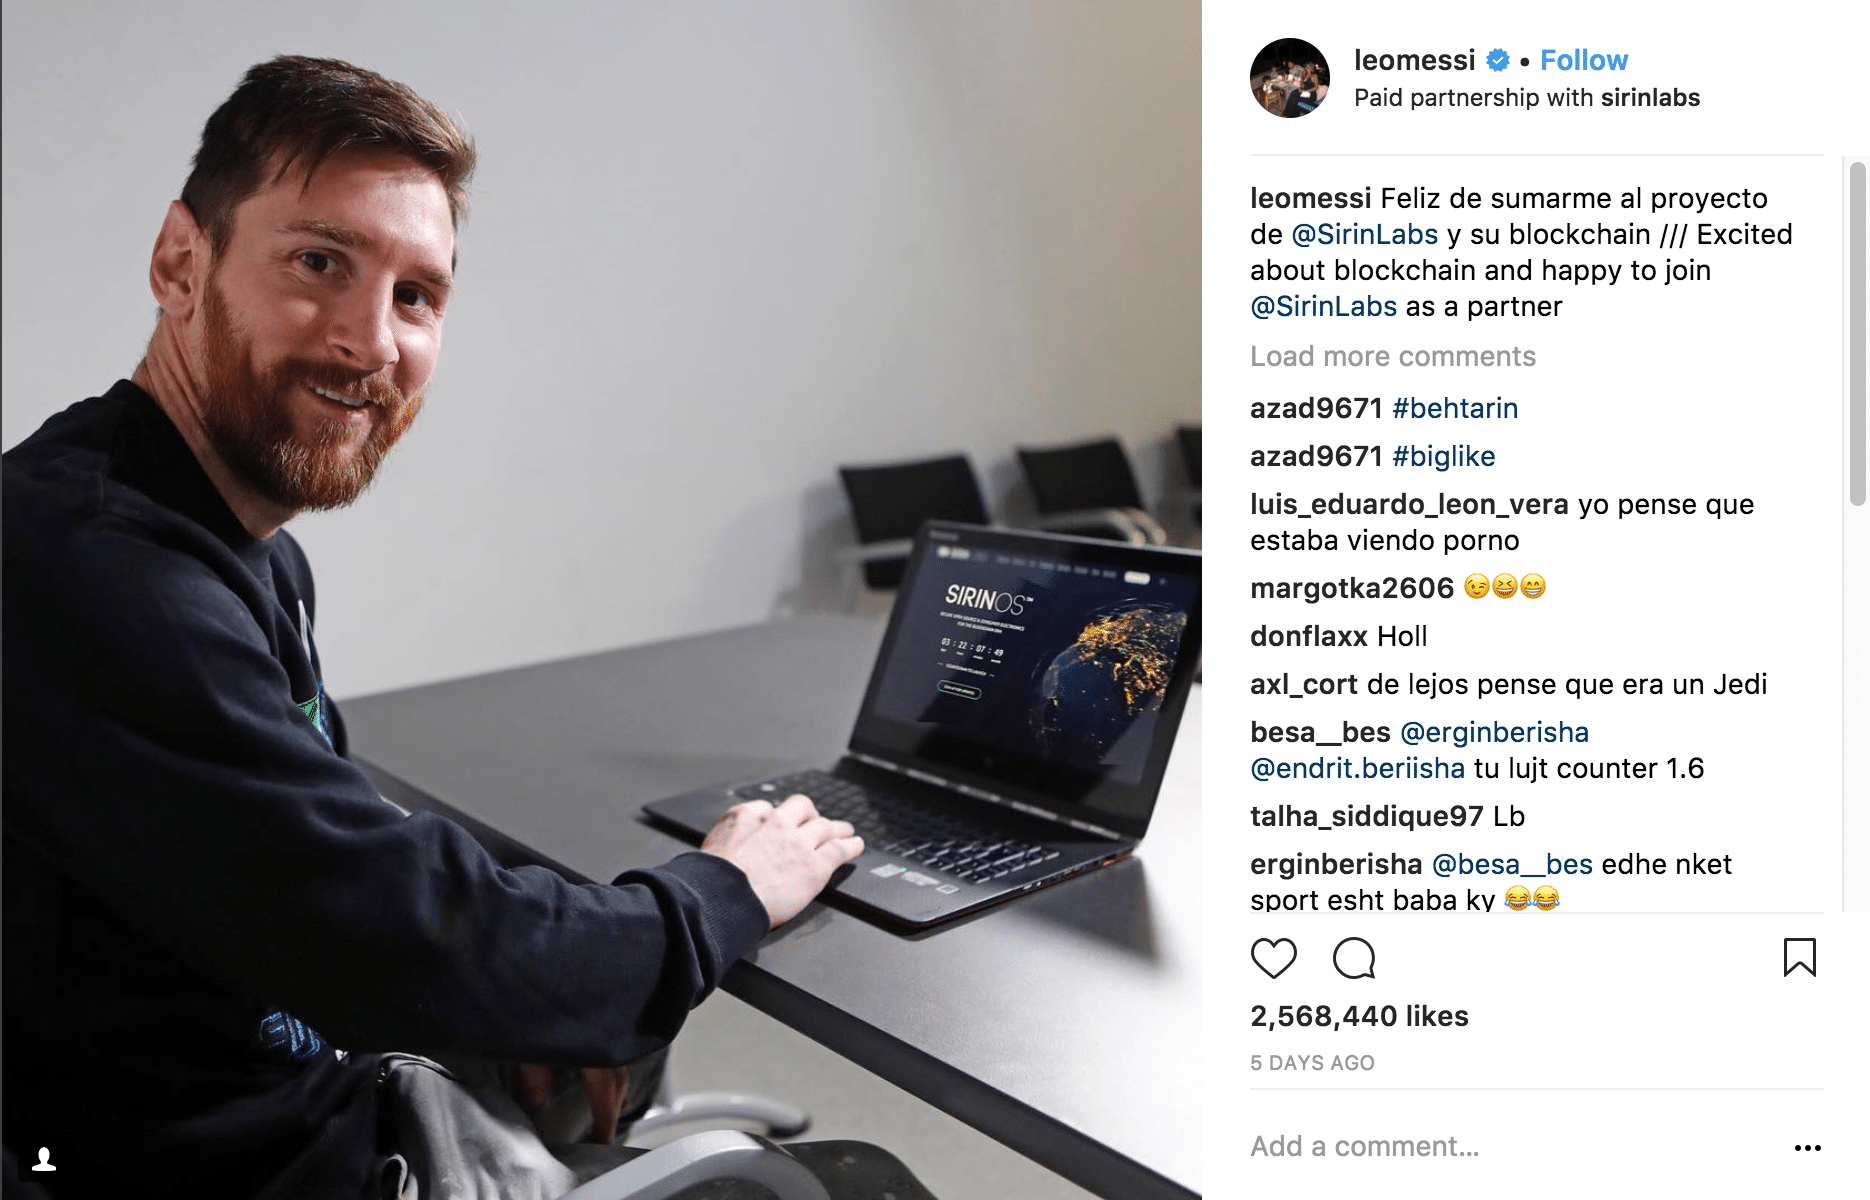 Sirin Labs Ico Scores With Their New Player: Lionel Messi